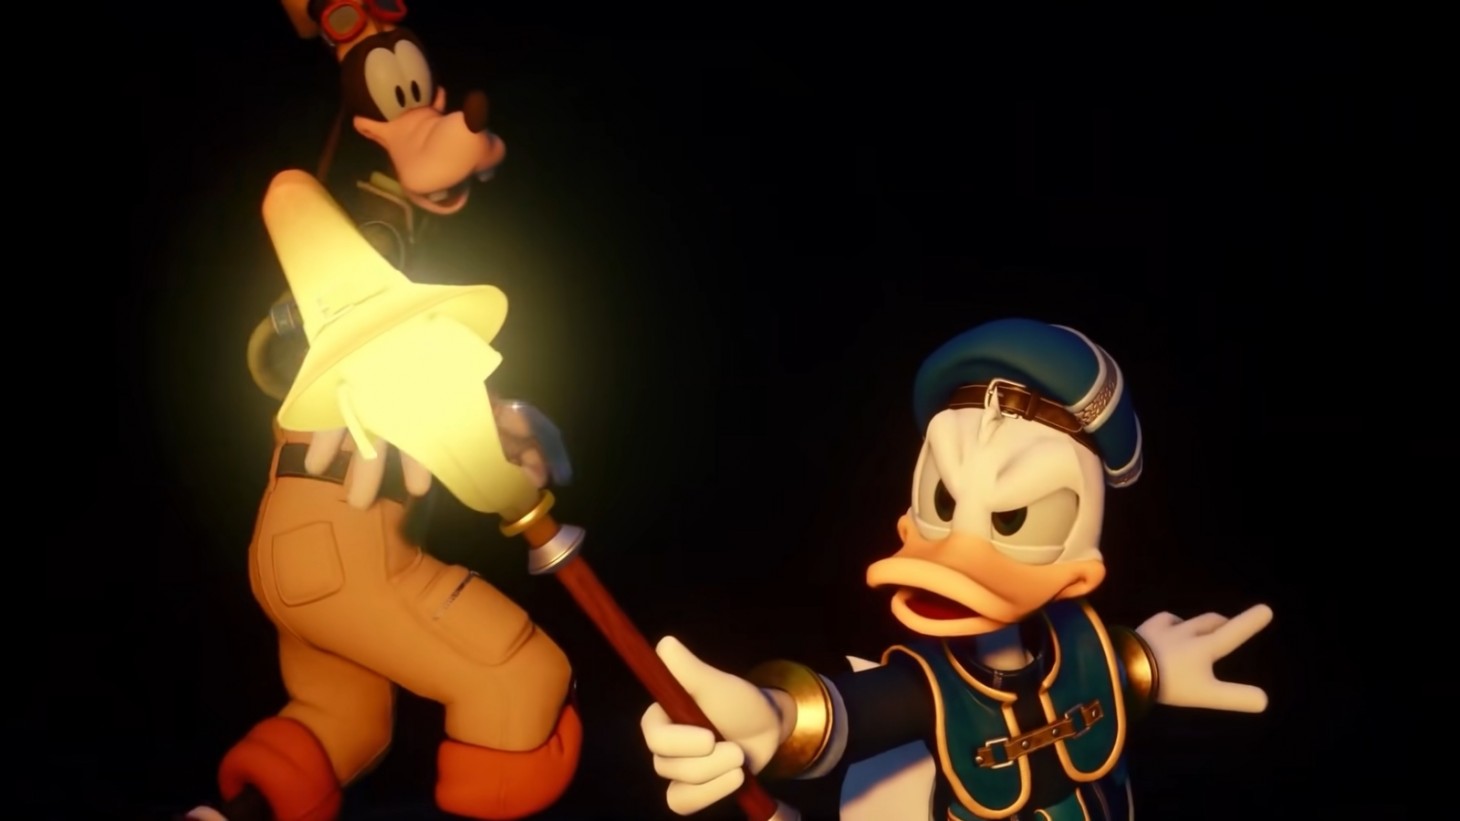 Kingdom Hearts: Missing Link Confirms Character Creation